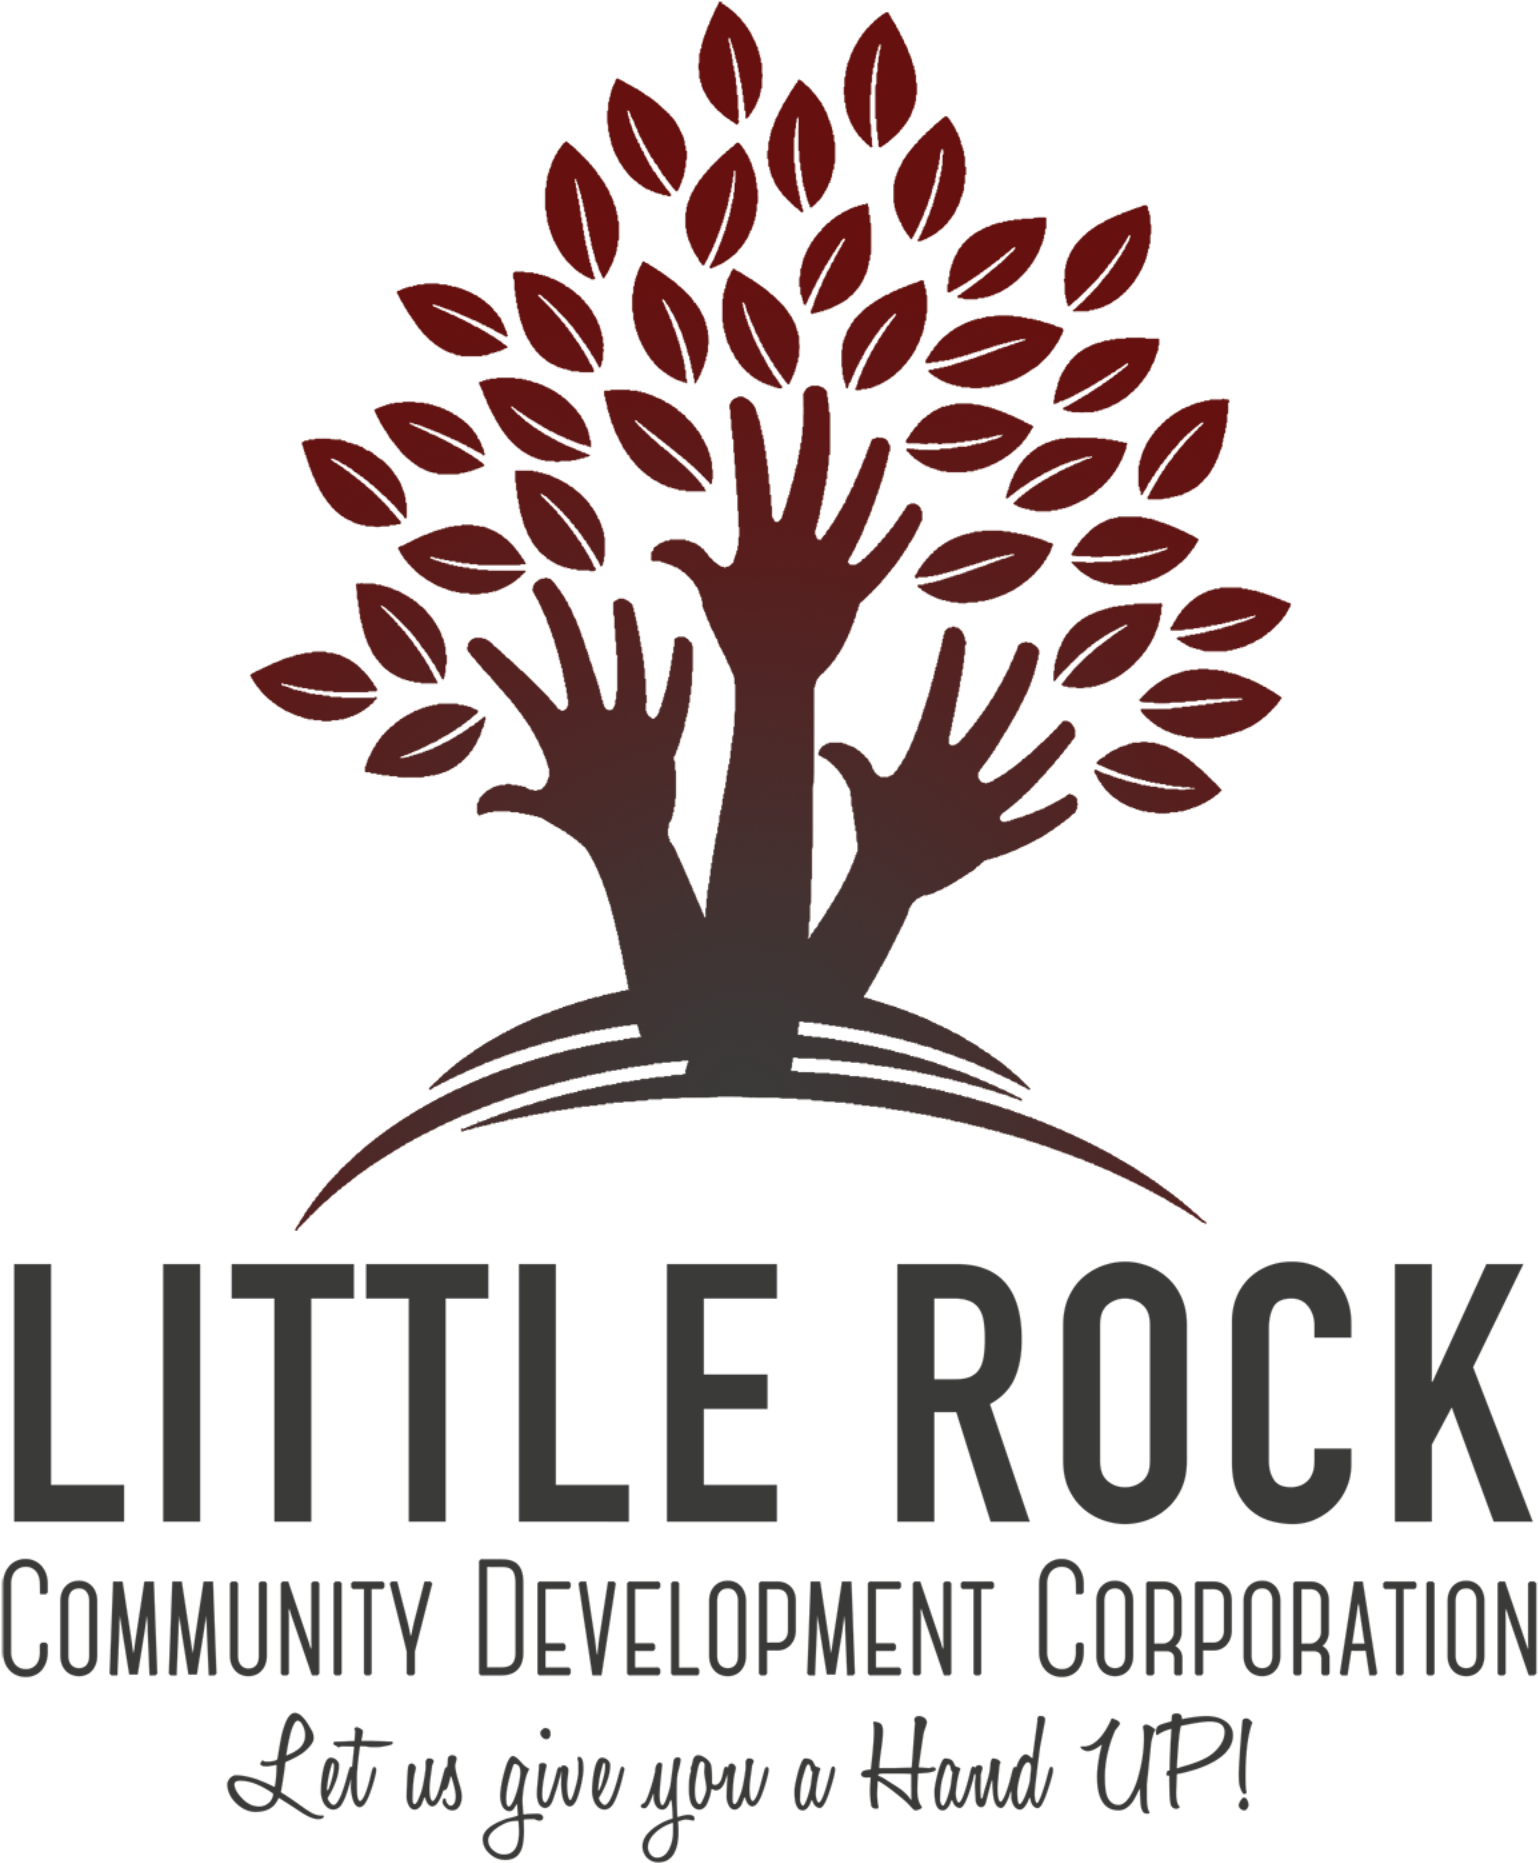 Little Rock Cdc - Better Work (2000x1905), Png Download